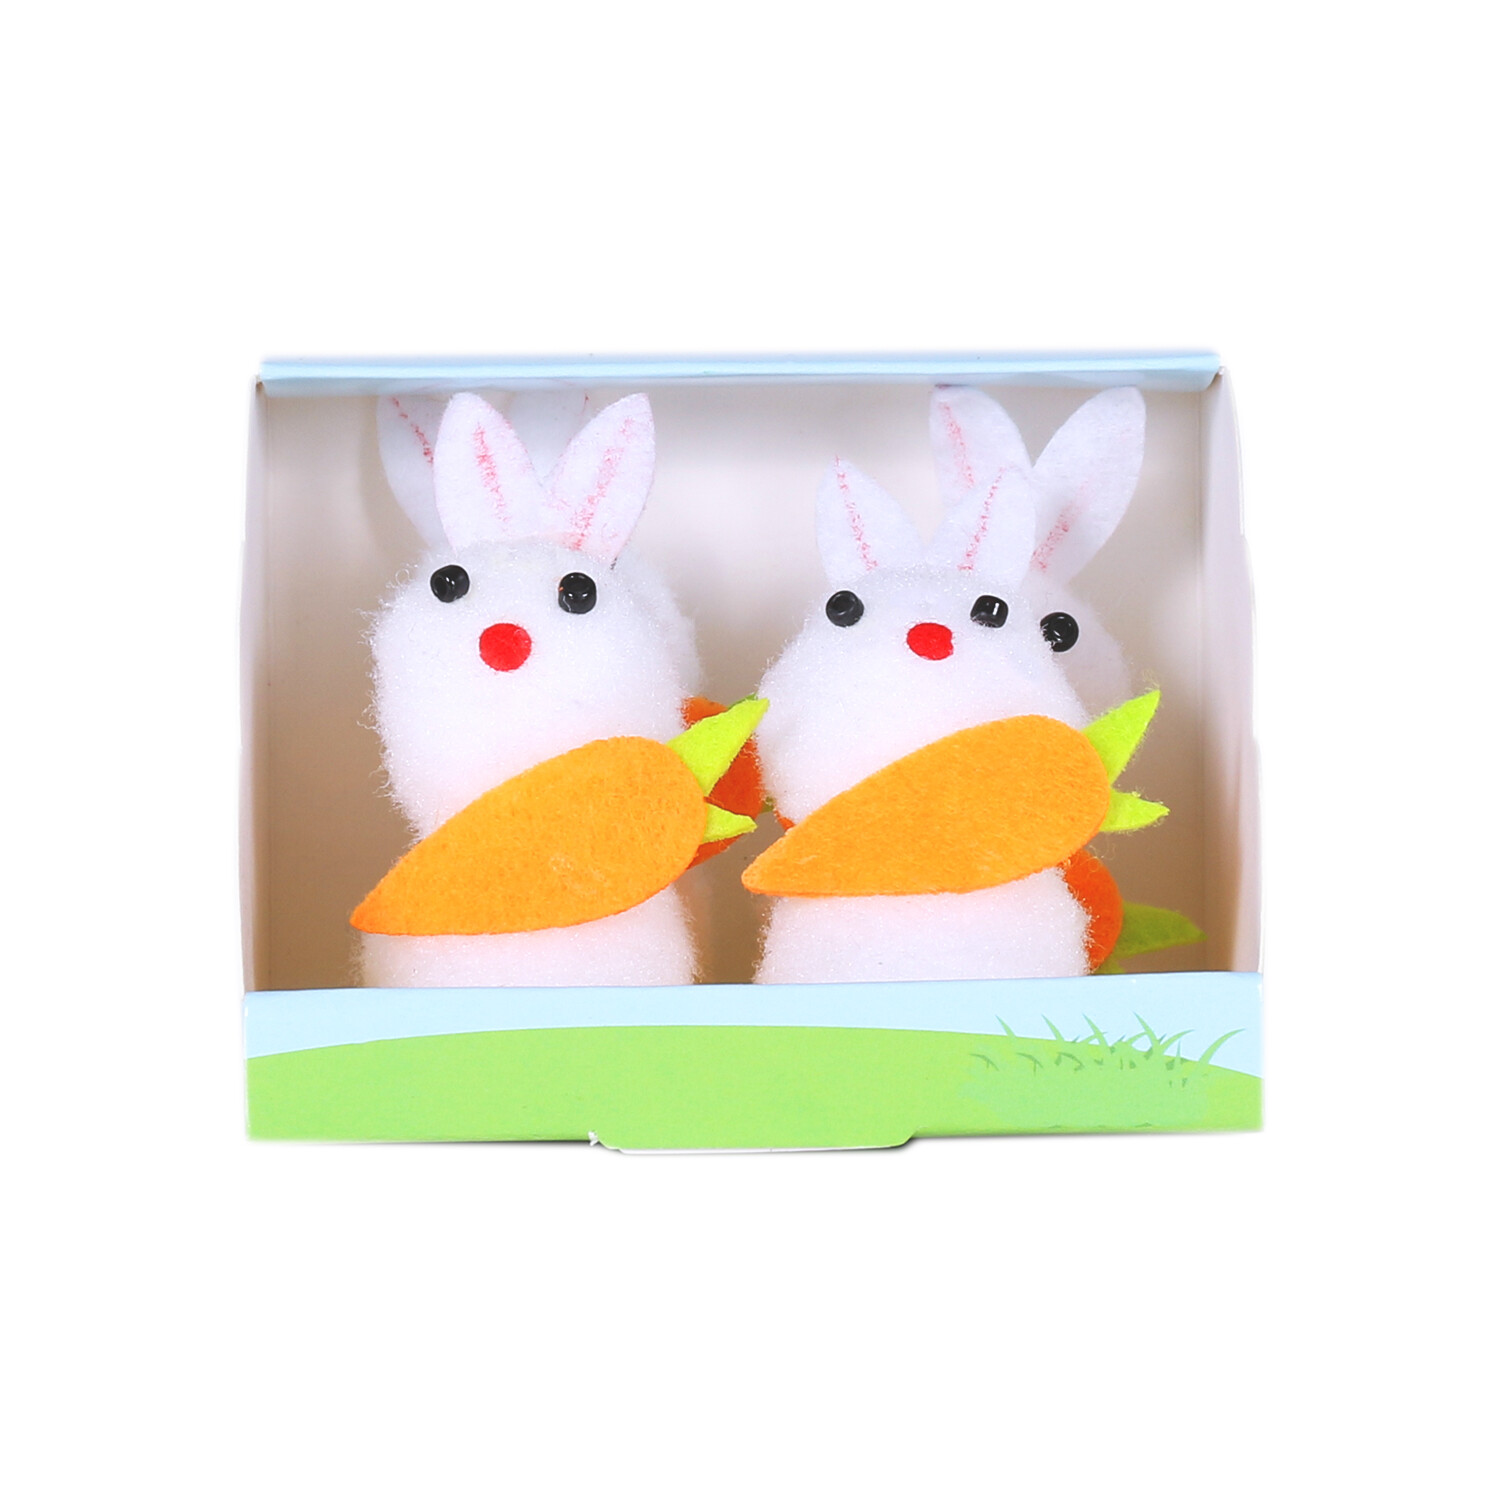 Easter Bunnies with Carrots Decoration 4 Pack Image